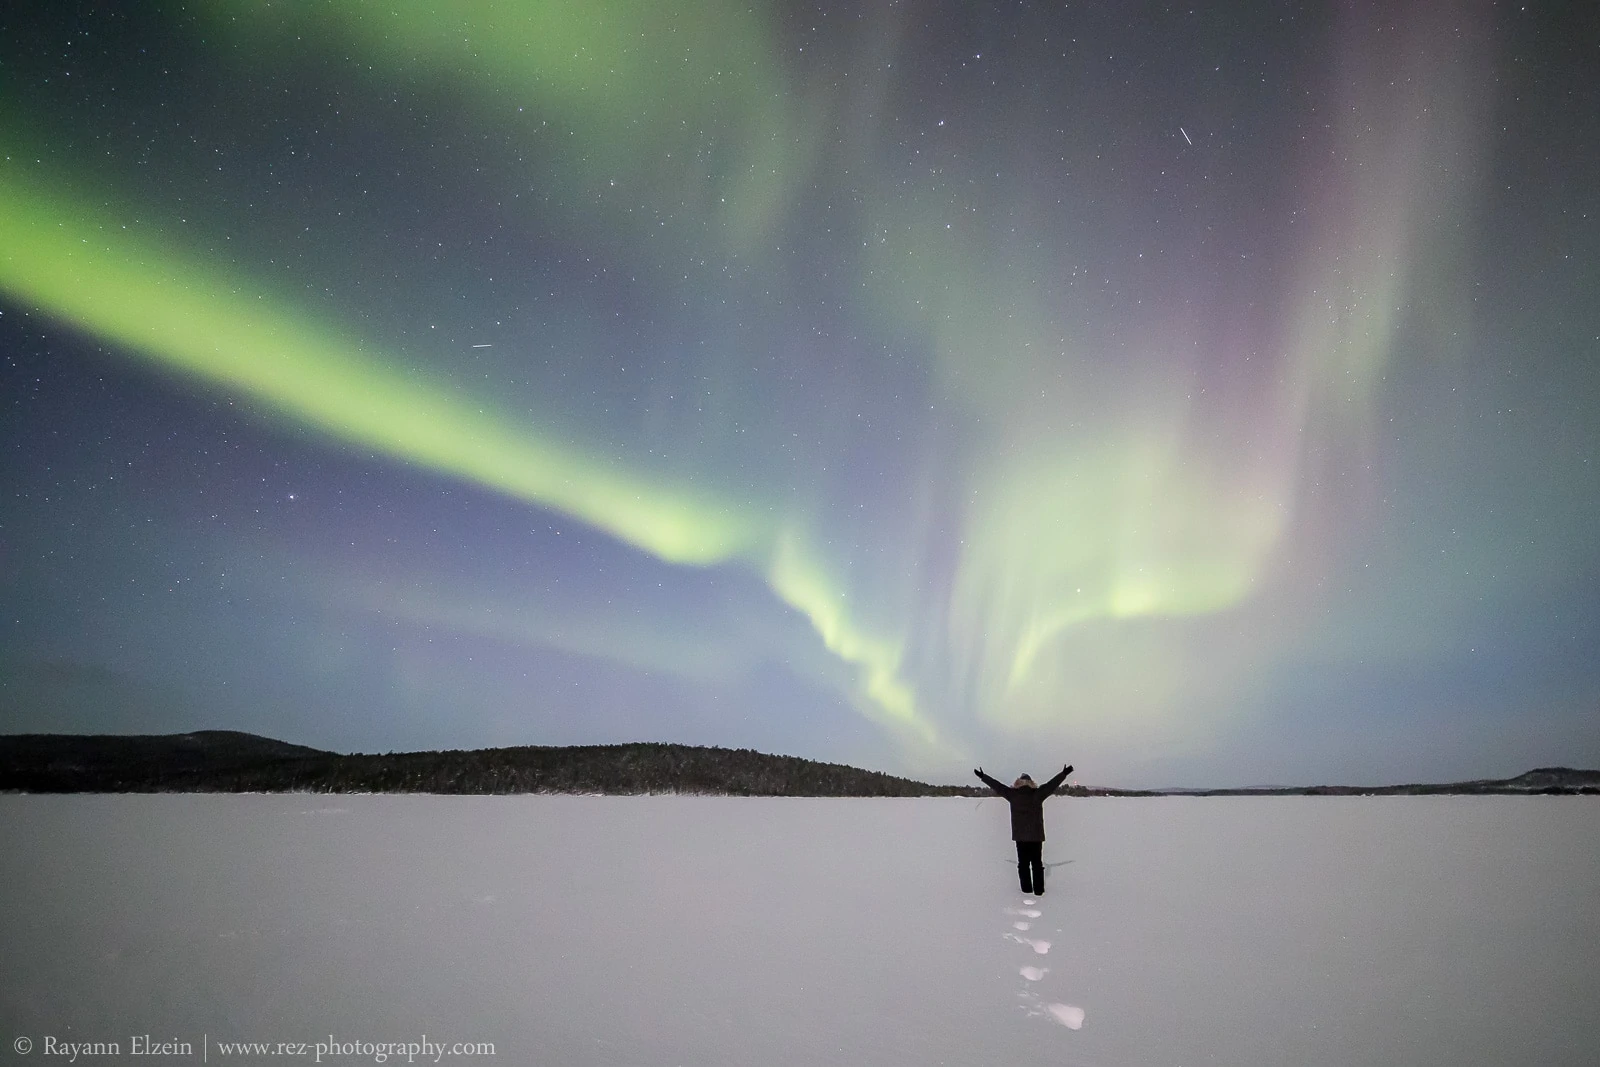 Sleepless night with the Northern Lights in Lapland